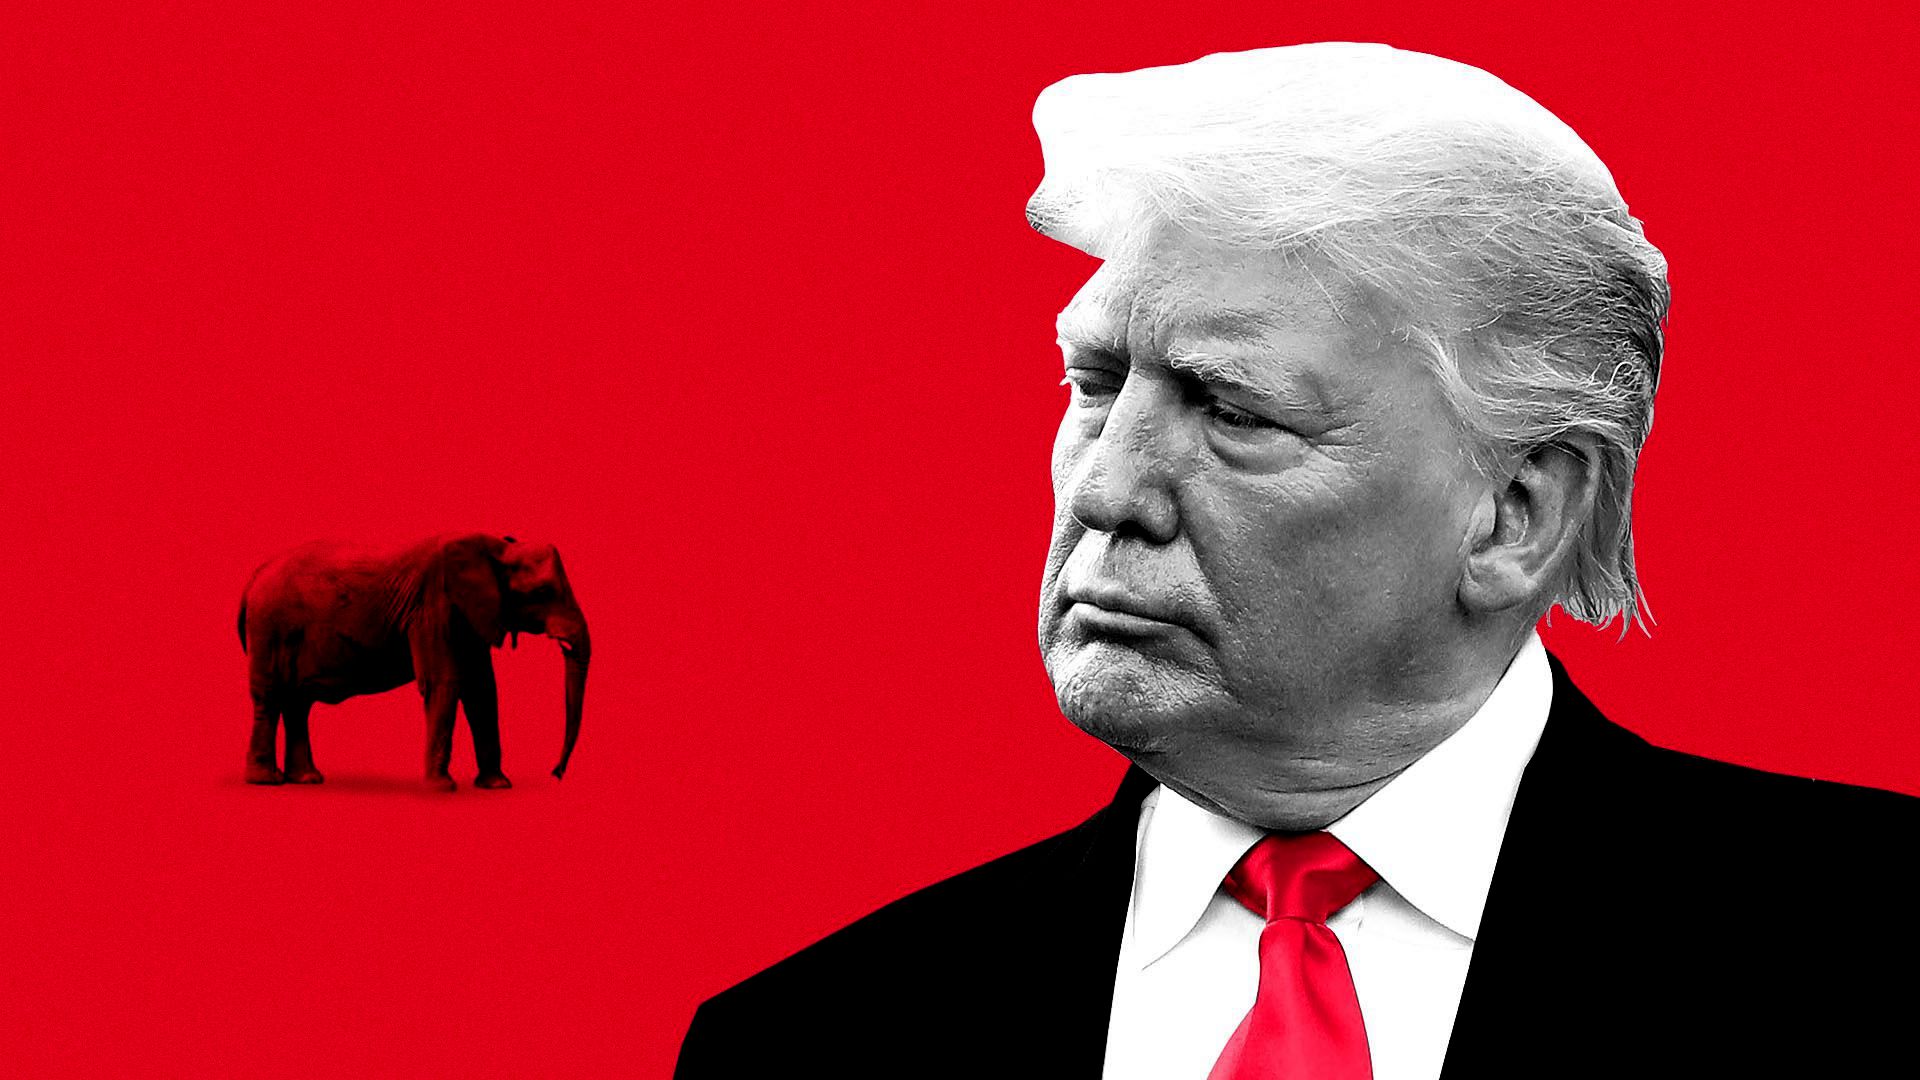 A picture of Donald trump on the red background